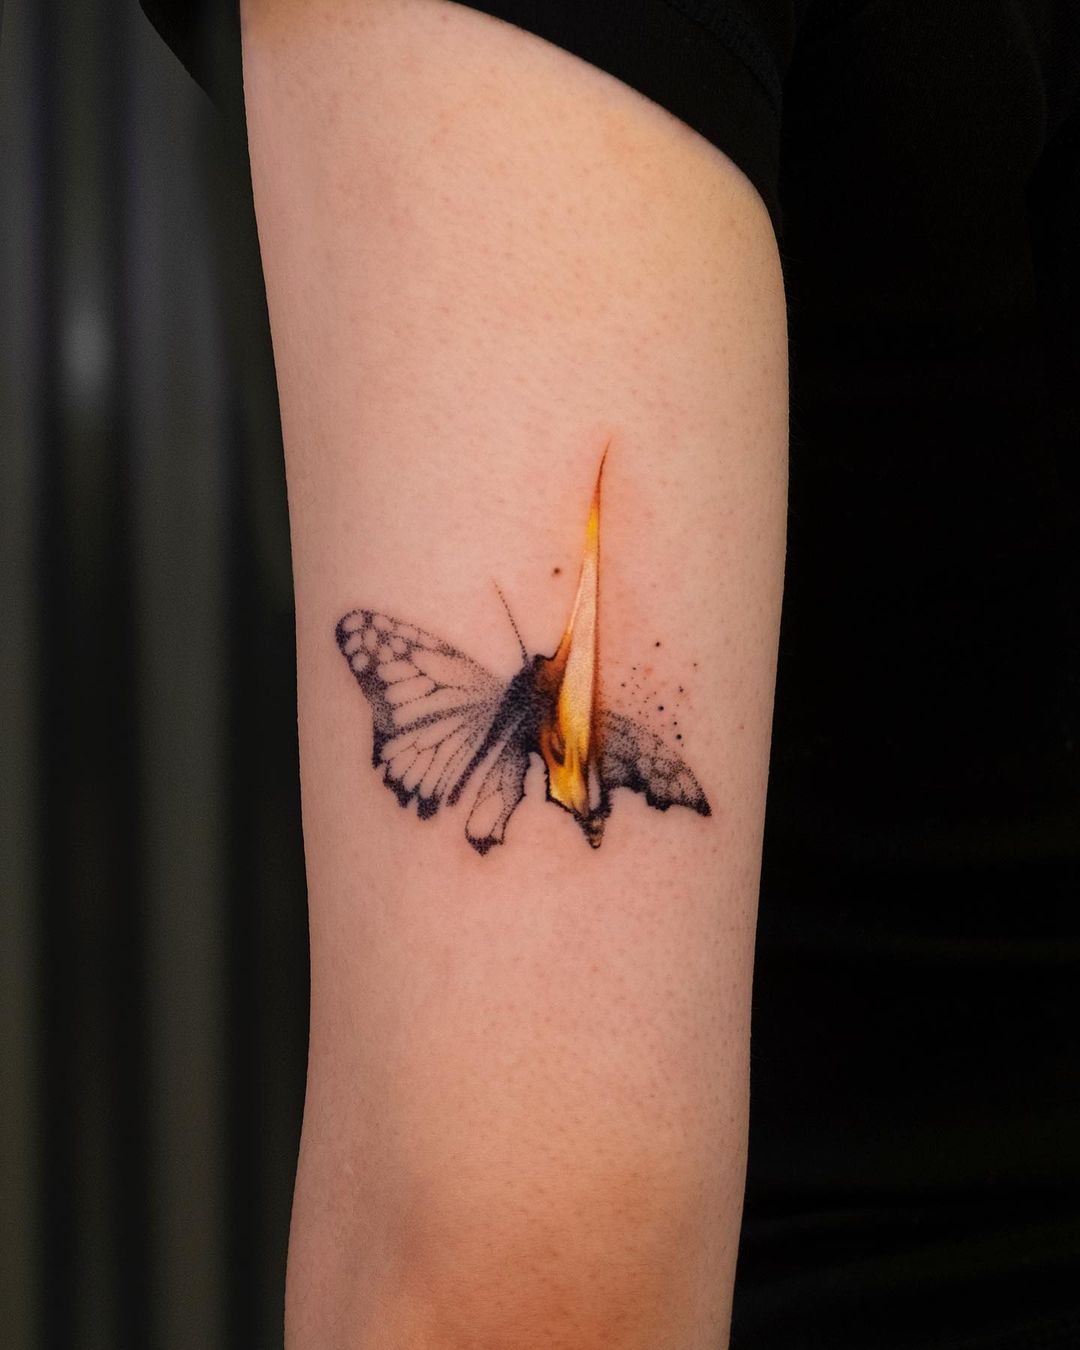 simple fire tattoo design by gogo centuryink